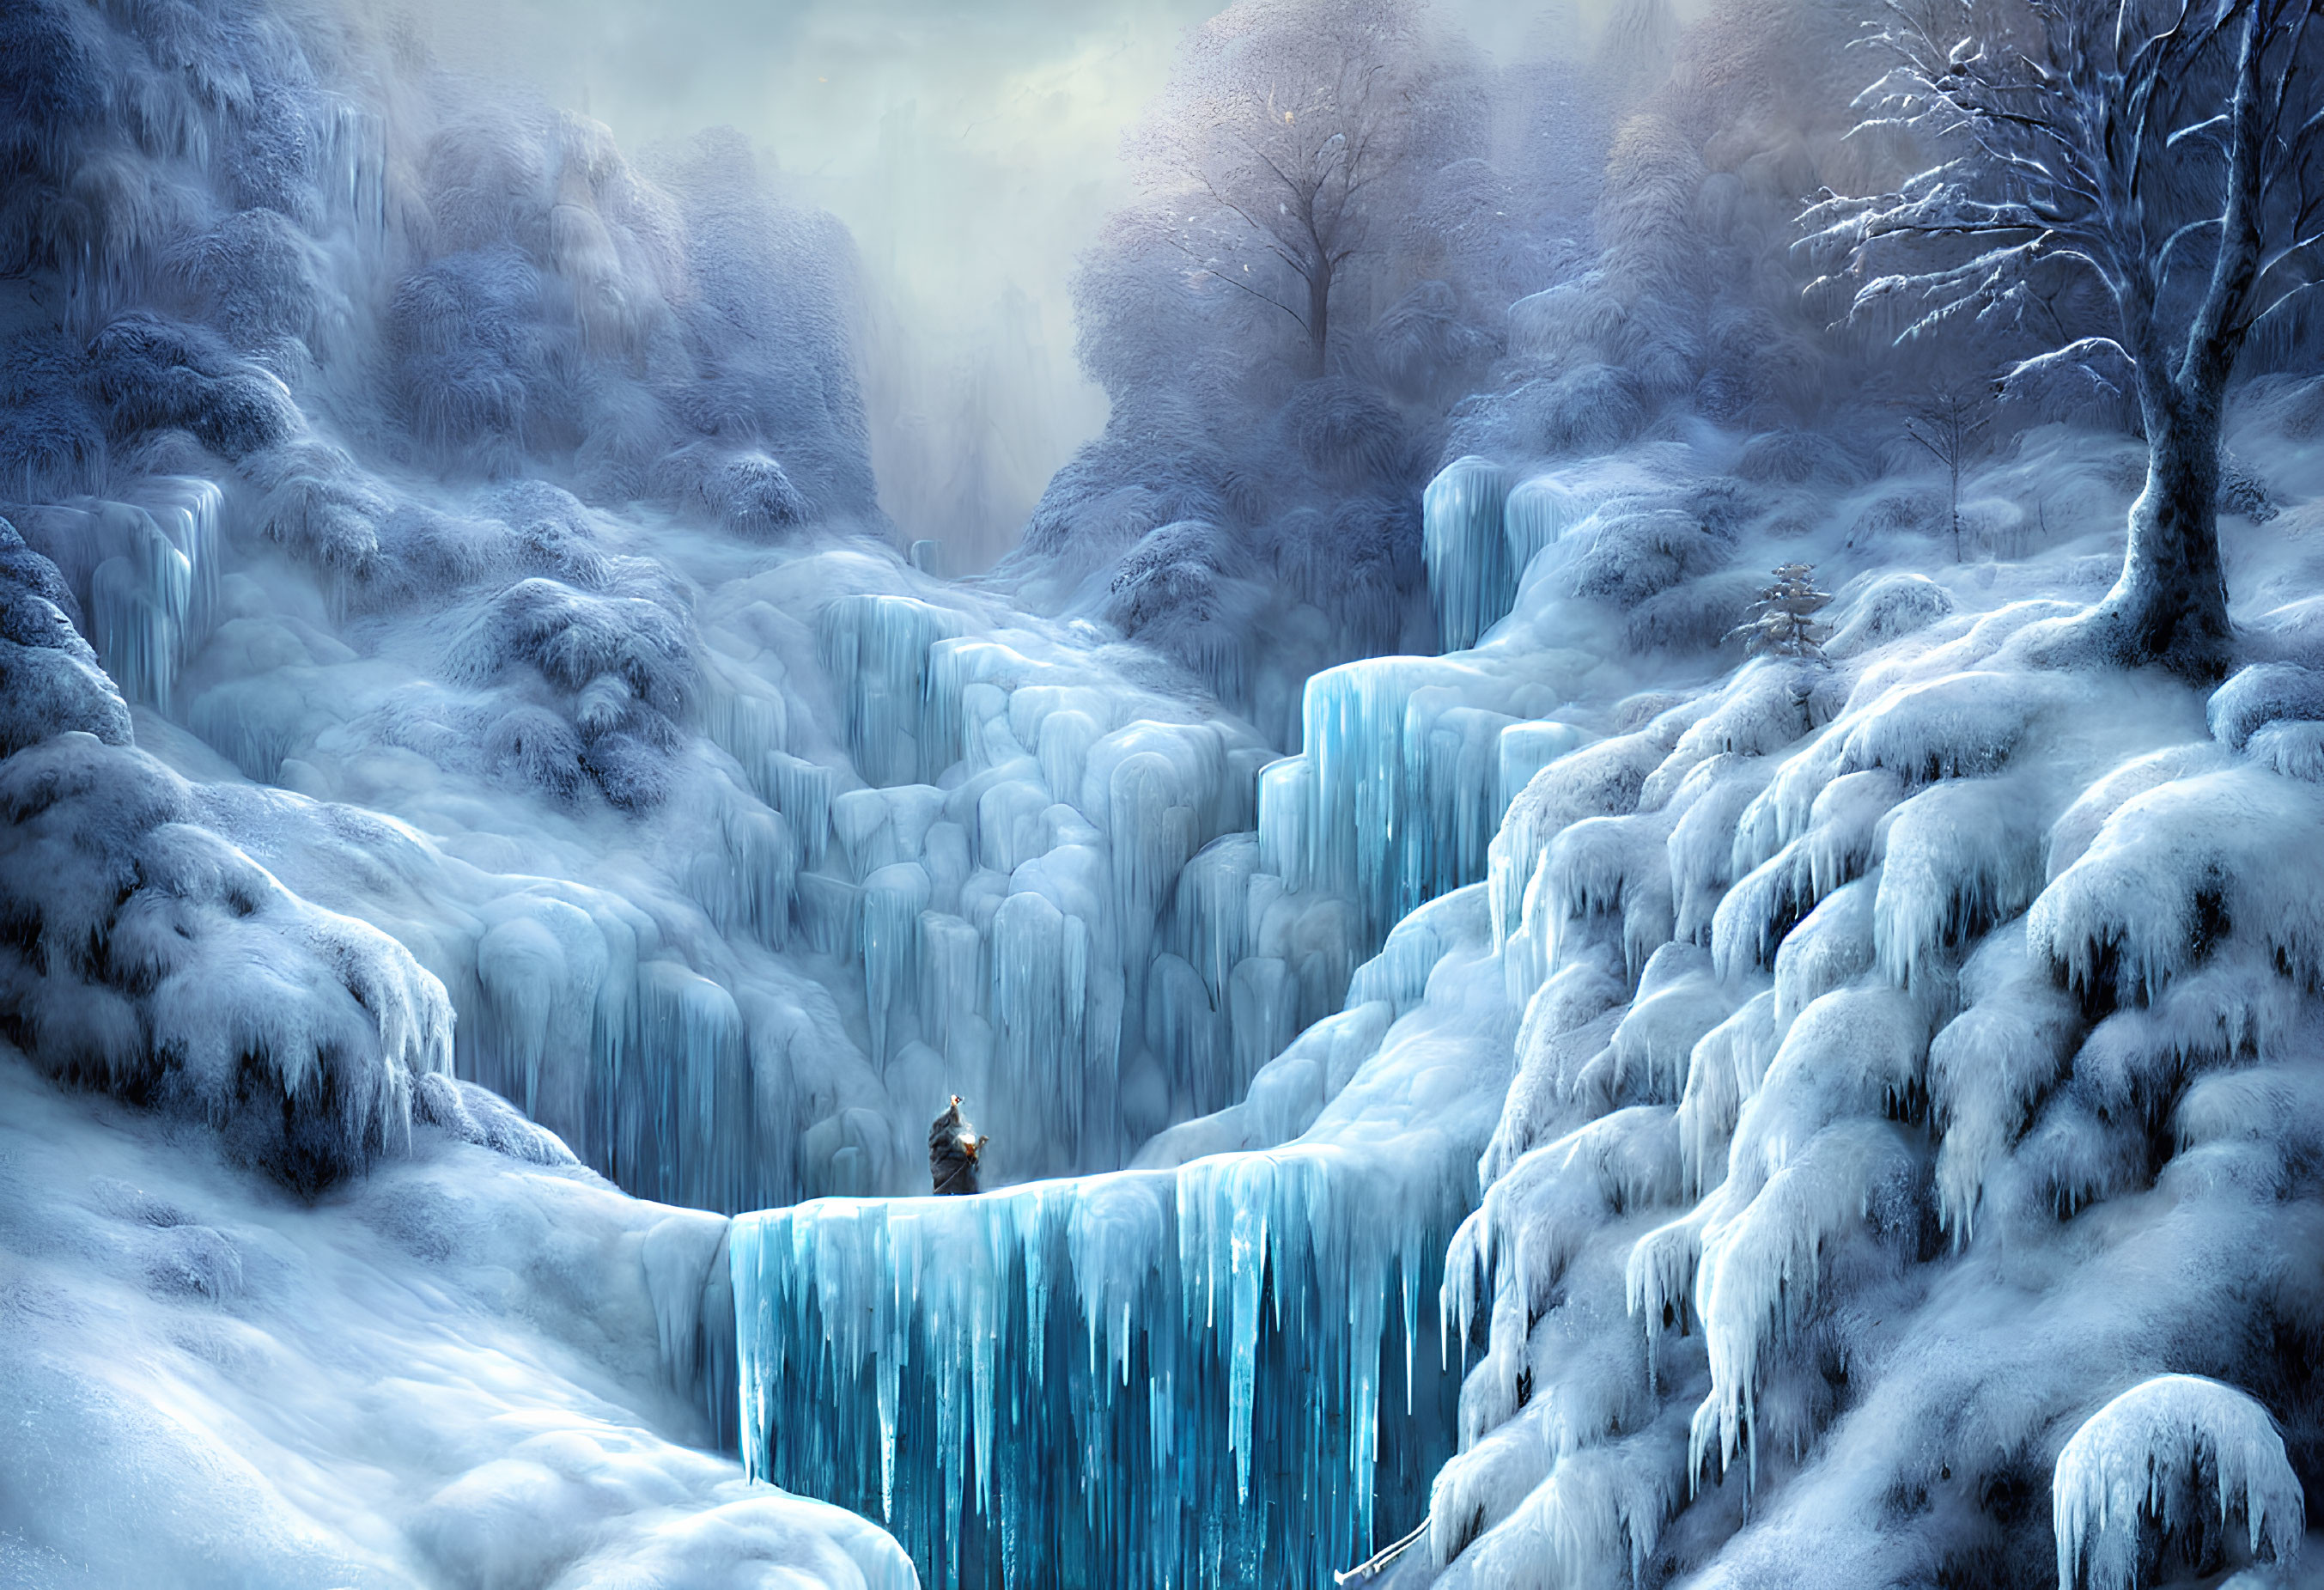 Snow-covered trees and icy waterfall in mystical winter landscape